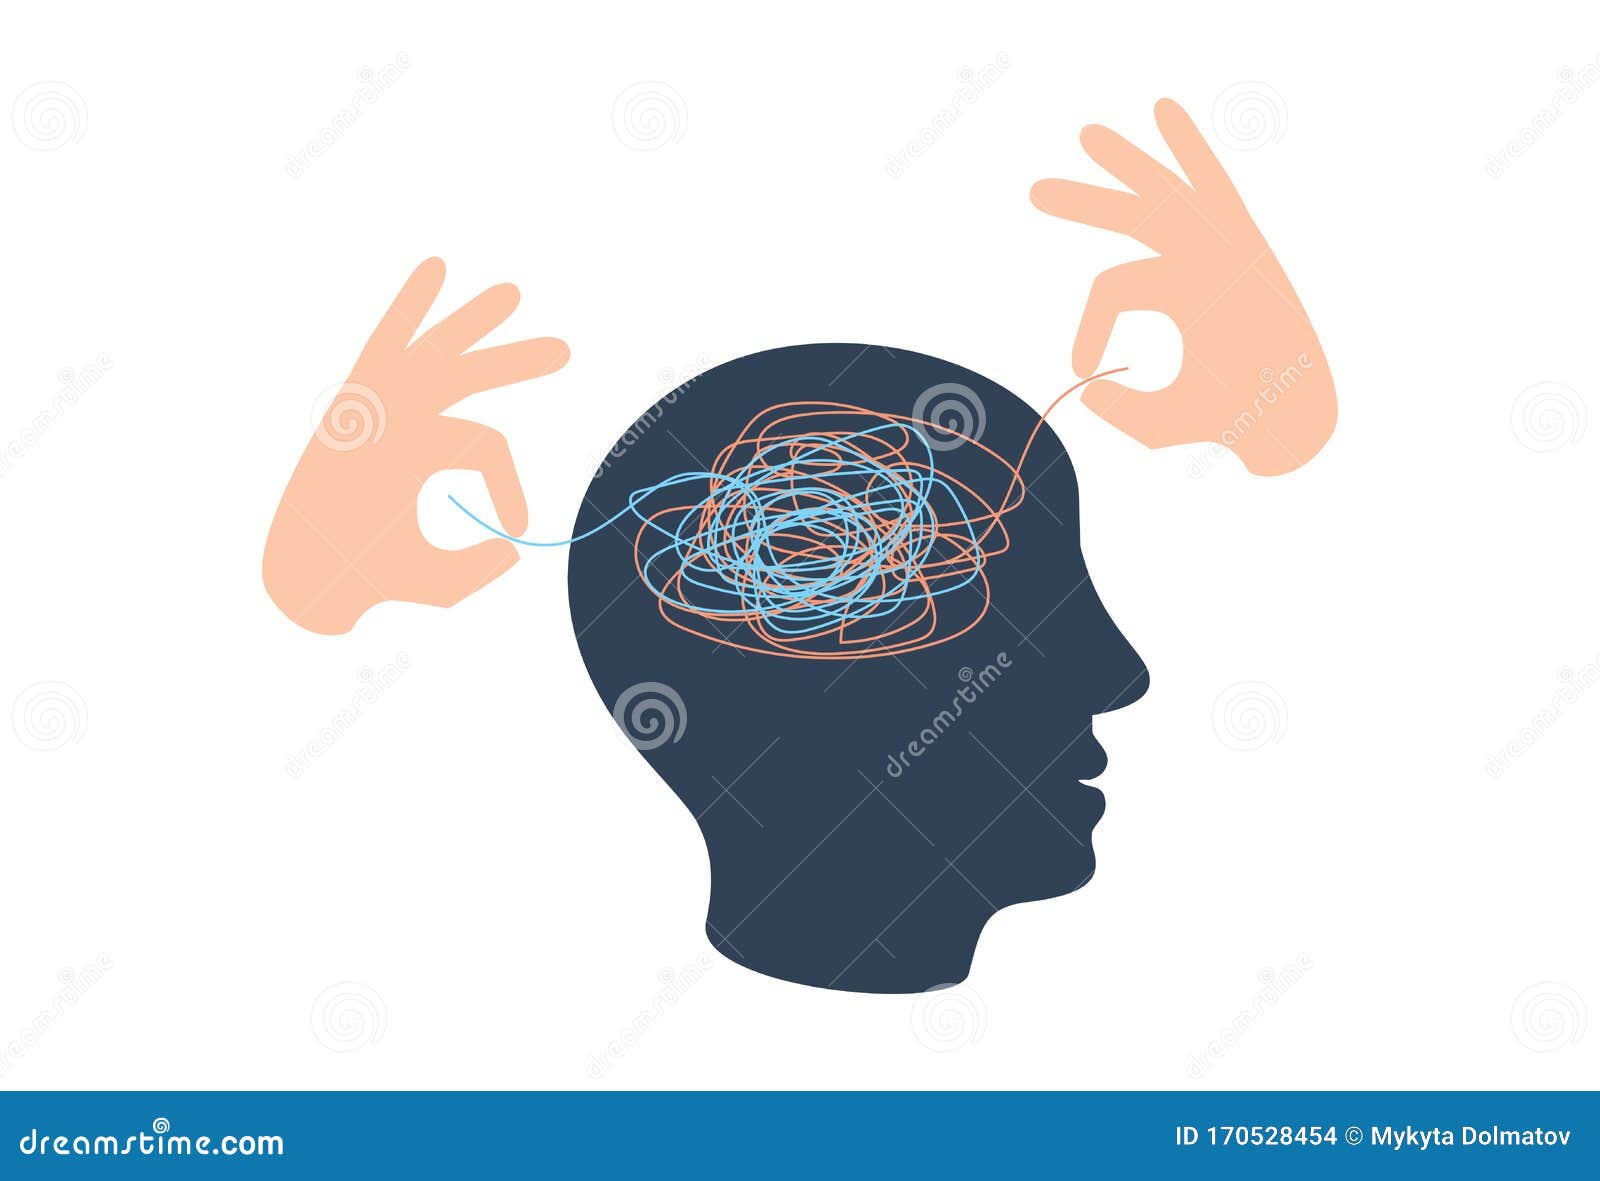 psychotherapy concept  with hands untangling messy snarl knot,  .